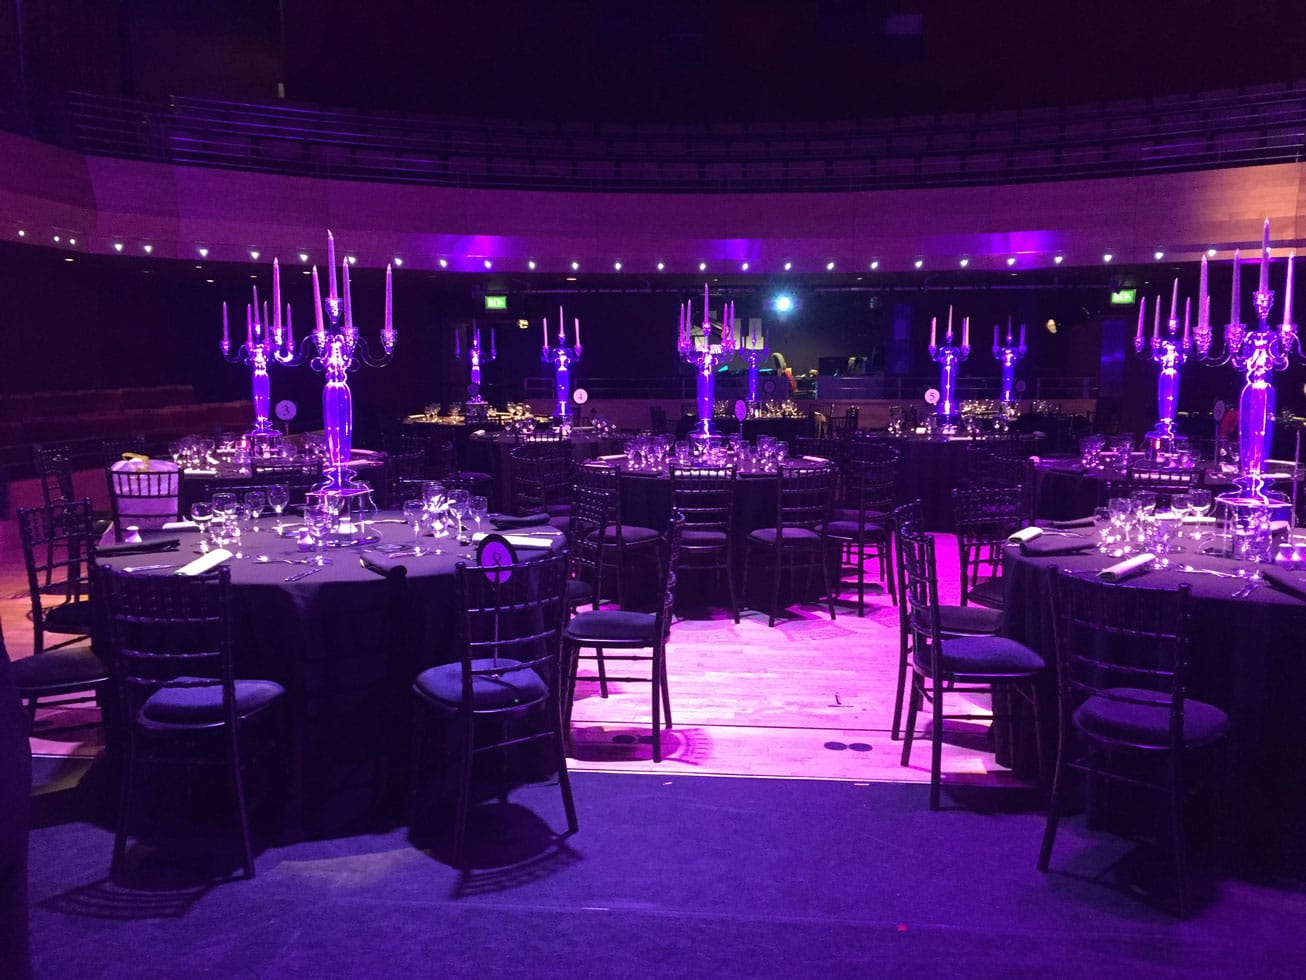 The Pentland Theatre set for a banquet with round tables covered in black table cloths with large silver candelabra.